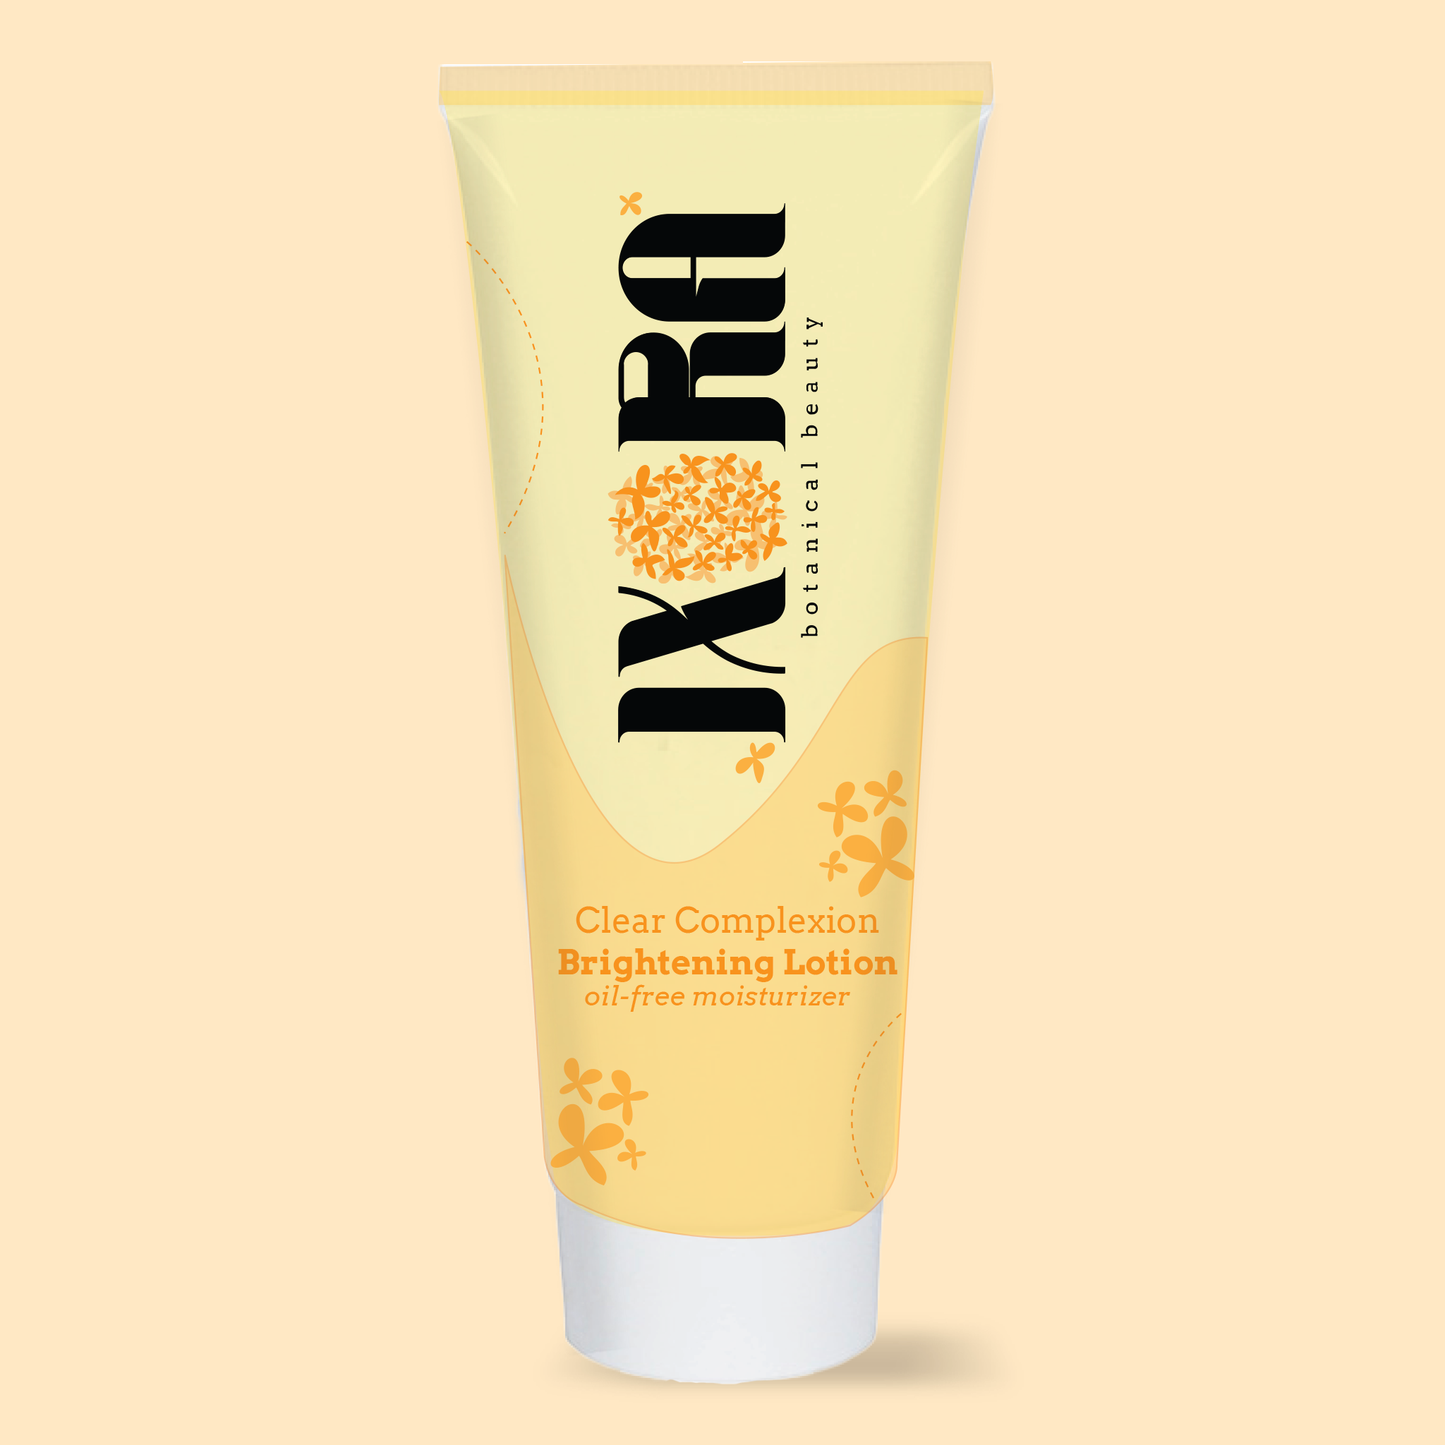 Clear Complexion Brightening Lotion (Travel Sized)